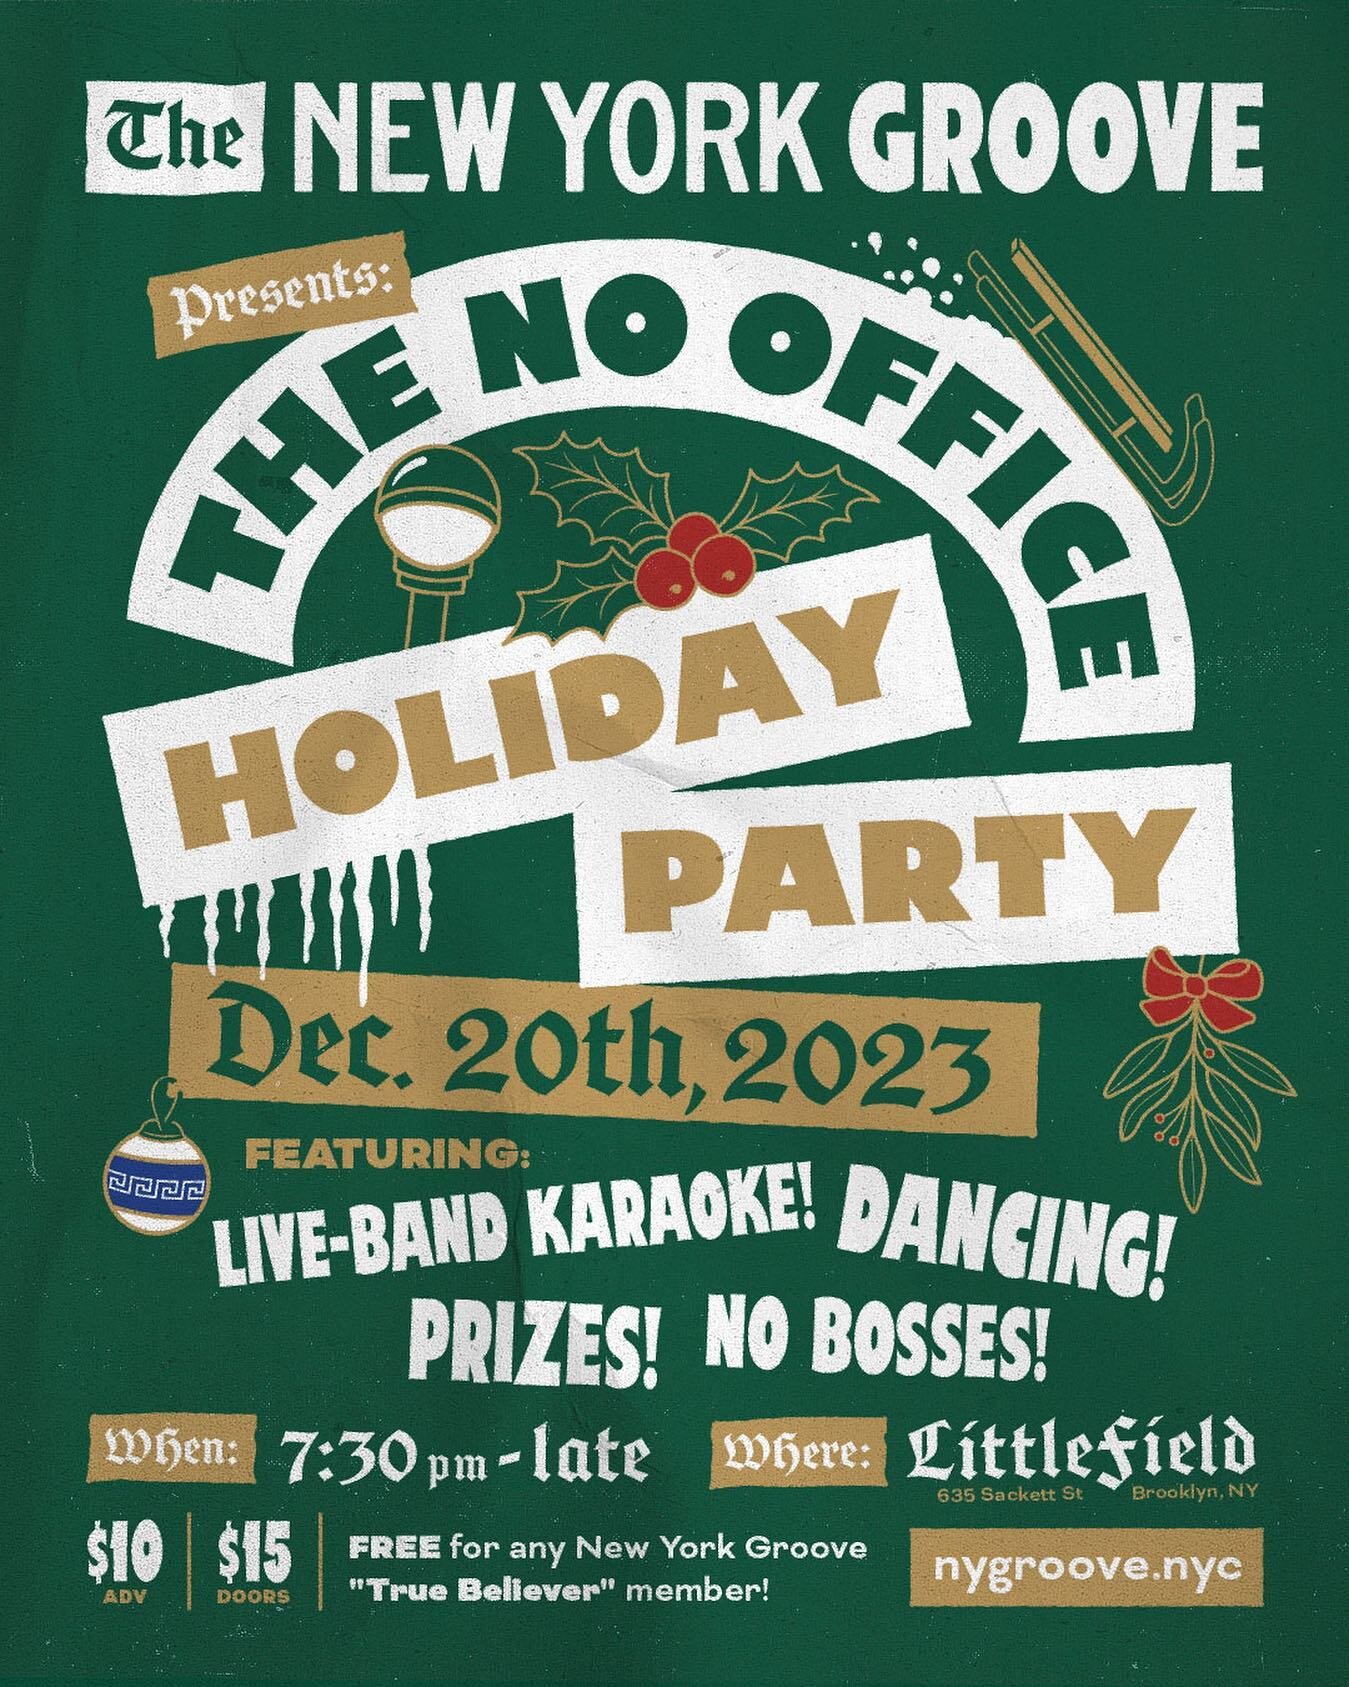 The @nygroove.nyc is throwing their first event ever! The No Office Holiday Party is happening on 12/20 @littlefieldnyc. Come celebrate NYC&rsquo;s Freelance + Work-From-Home New Yorkers. All are welcome. See u there. 🎟️ Tickets via @nygroove.nyc / 